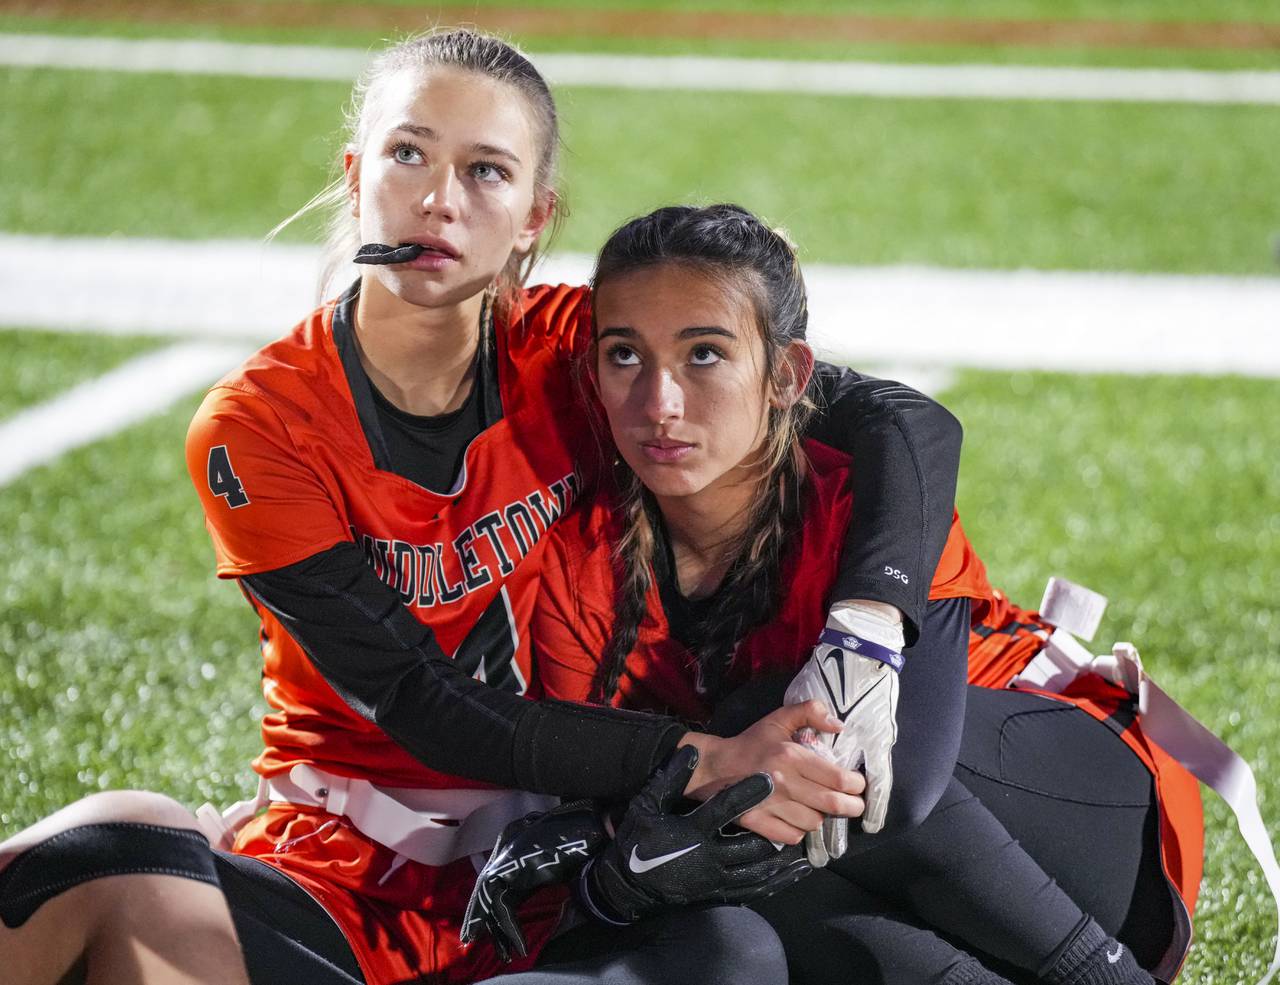 Middletown’s Genevieve Chase (4) and Chloe Lee (9) keep each other warm at half time during the Girls flag semifinals at the Under Armour’s “The Stadium at the House” in Baltimore, Wednesday.